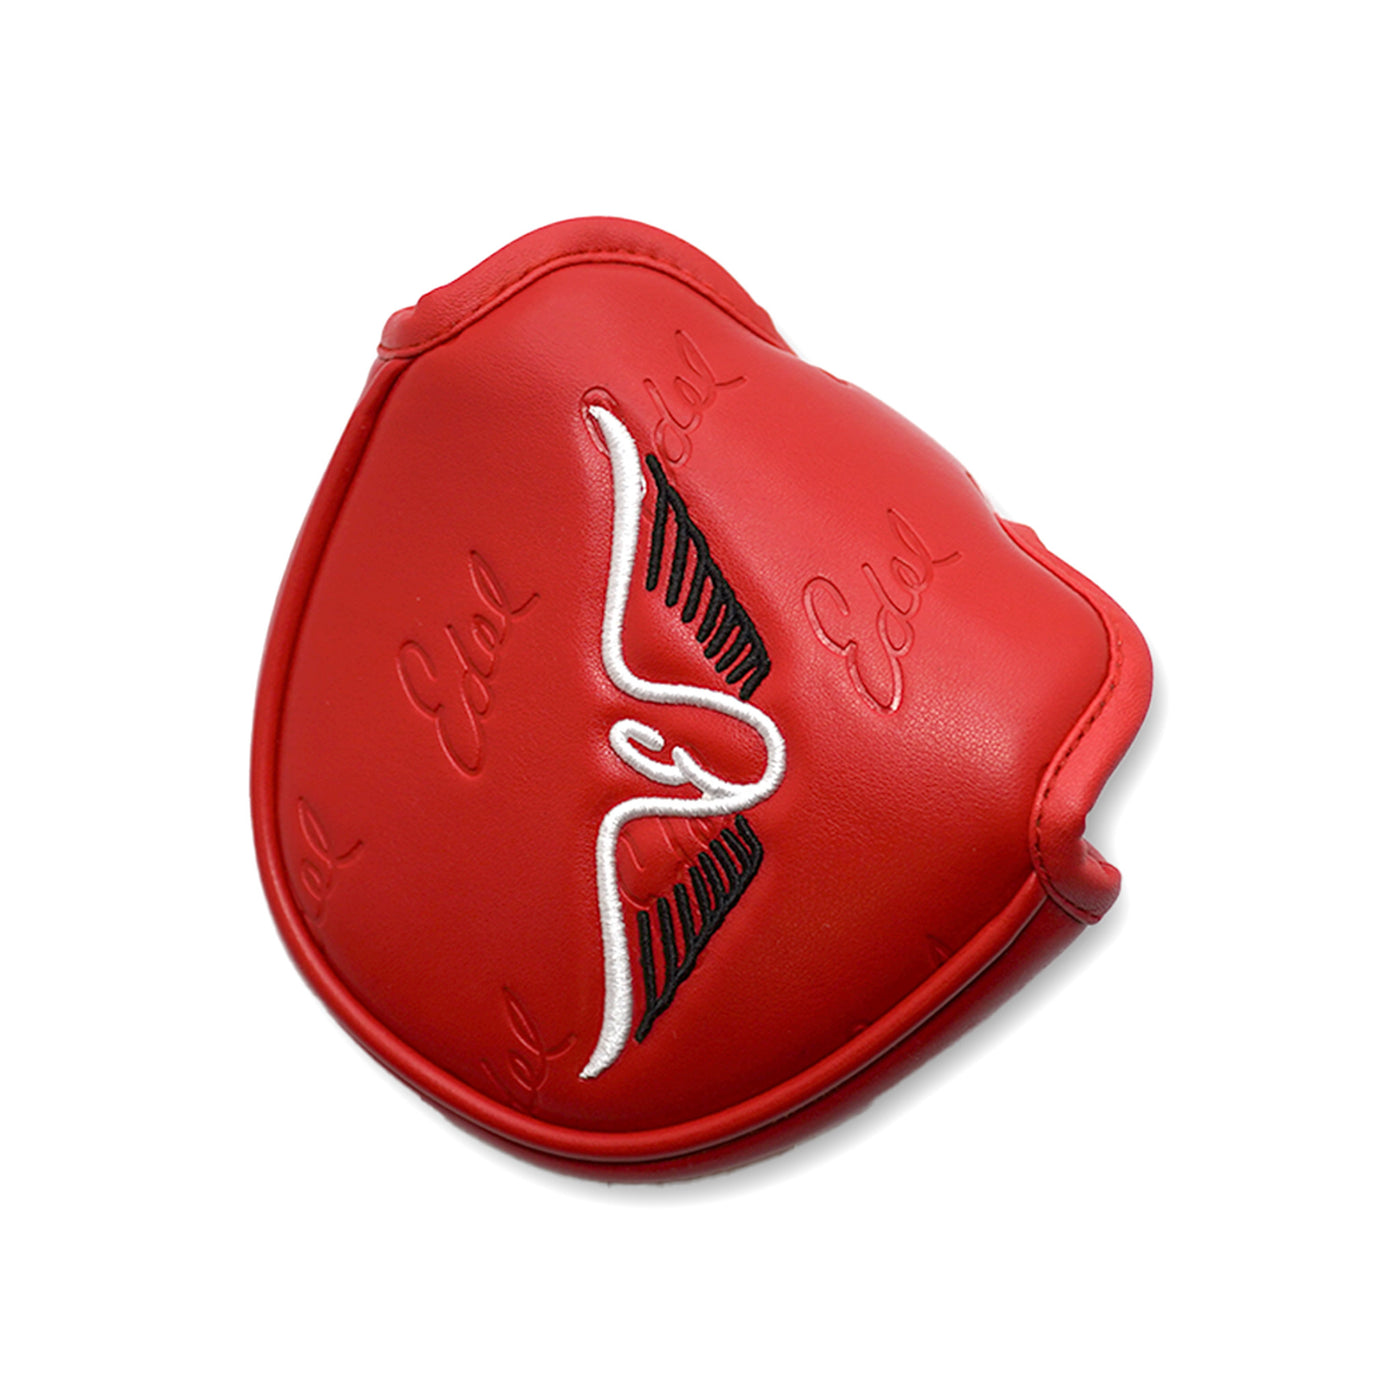 Edel Red Mallet Putter Cover Close-Up